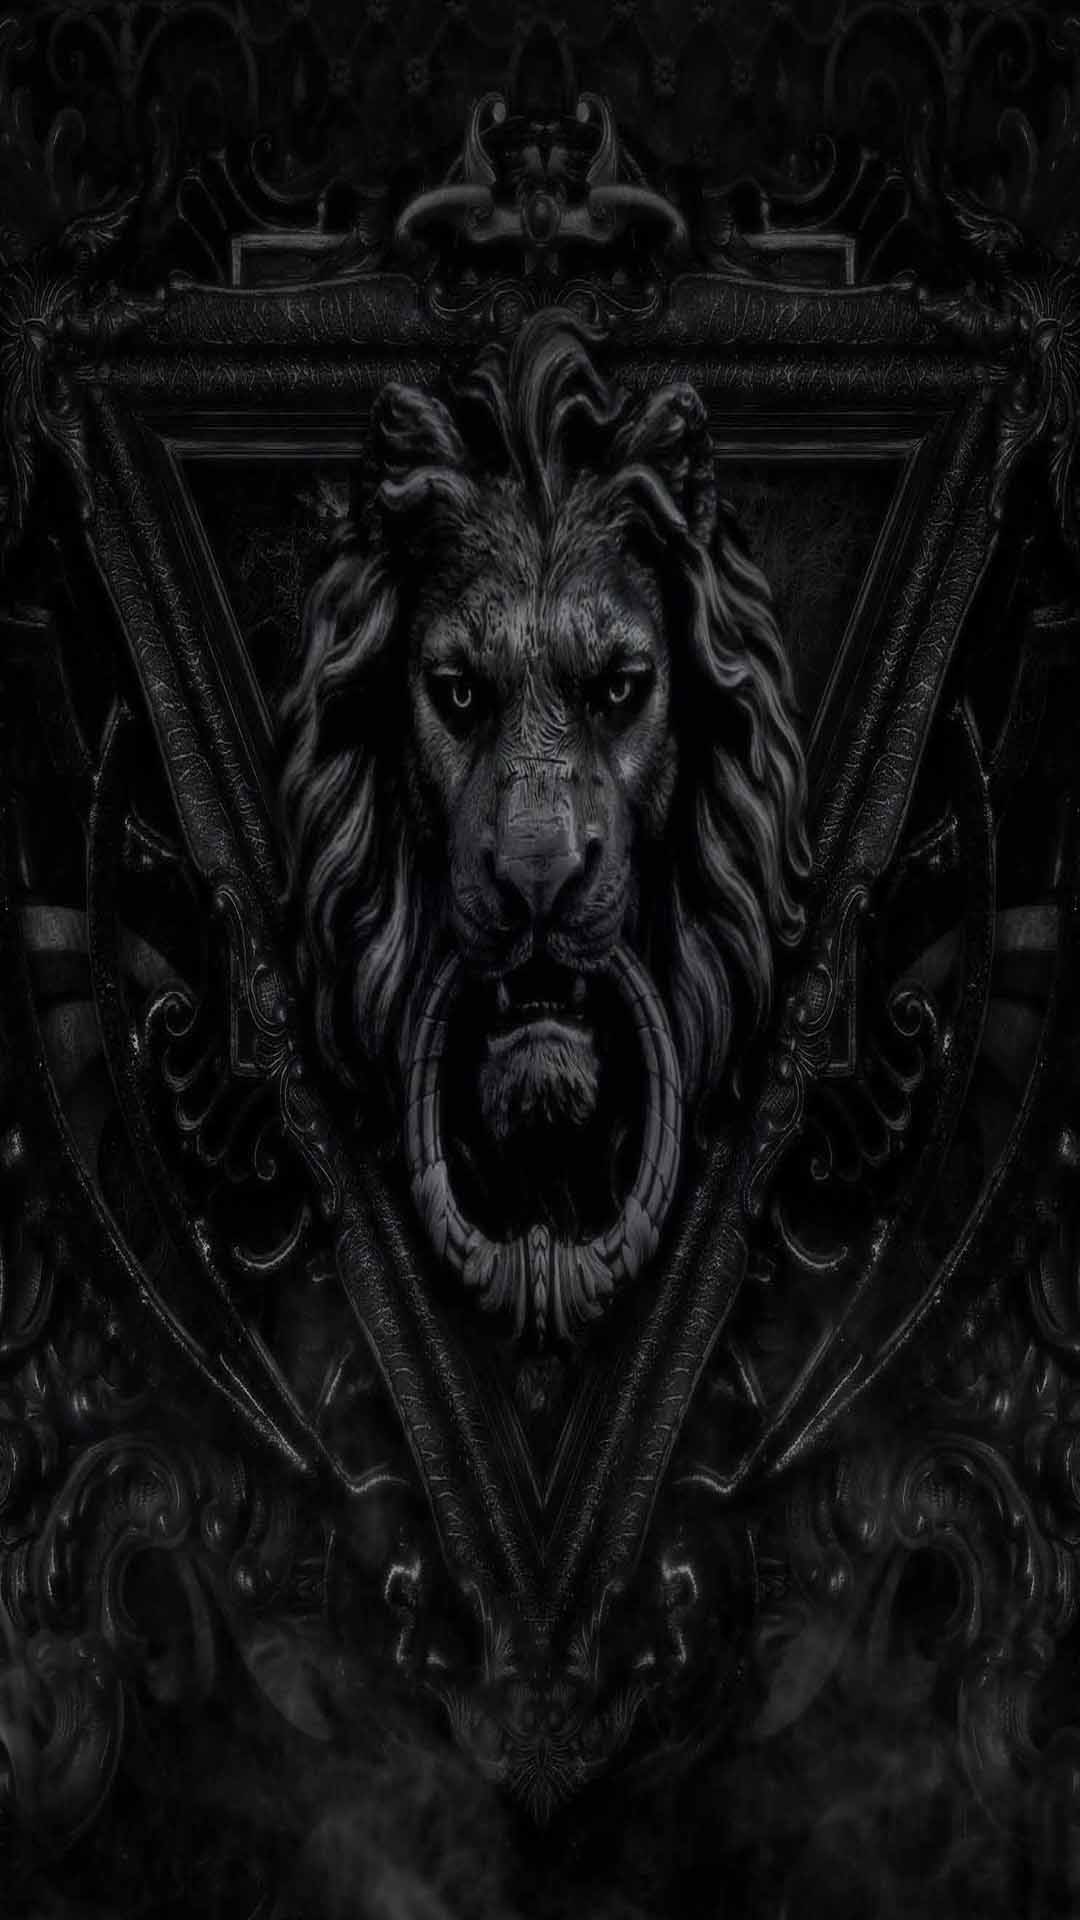 Dark lion iphone 5s full hd wallpapers free download | iPhone ...